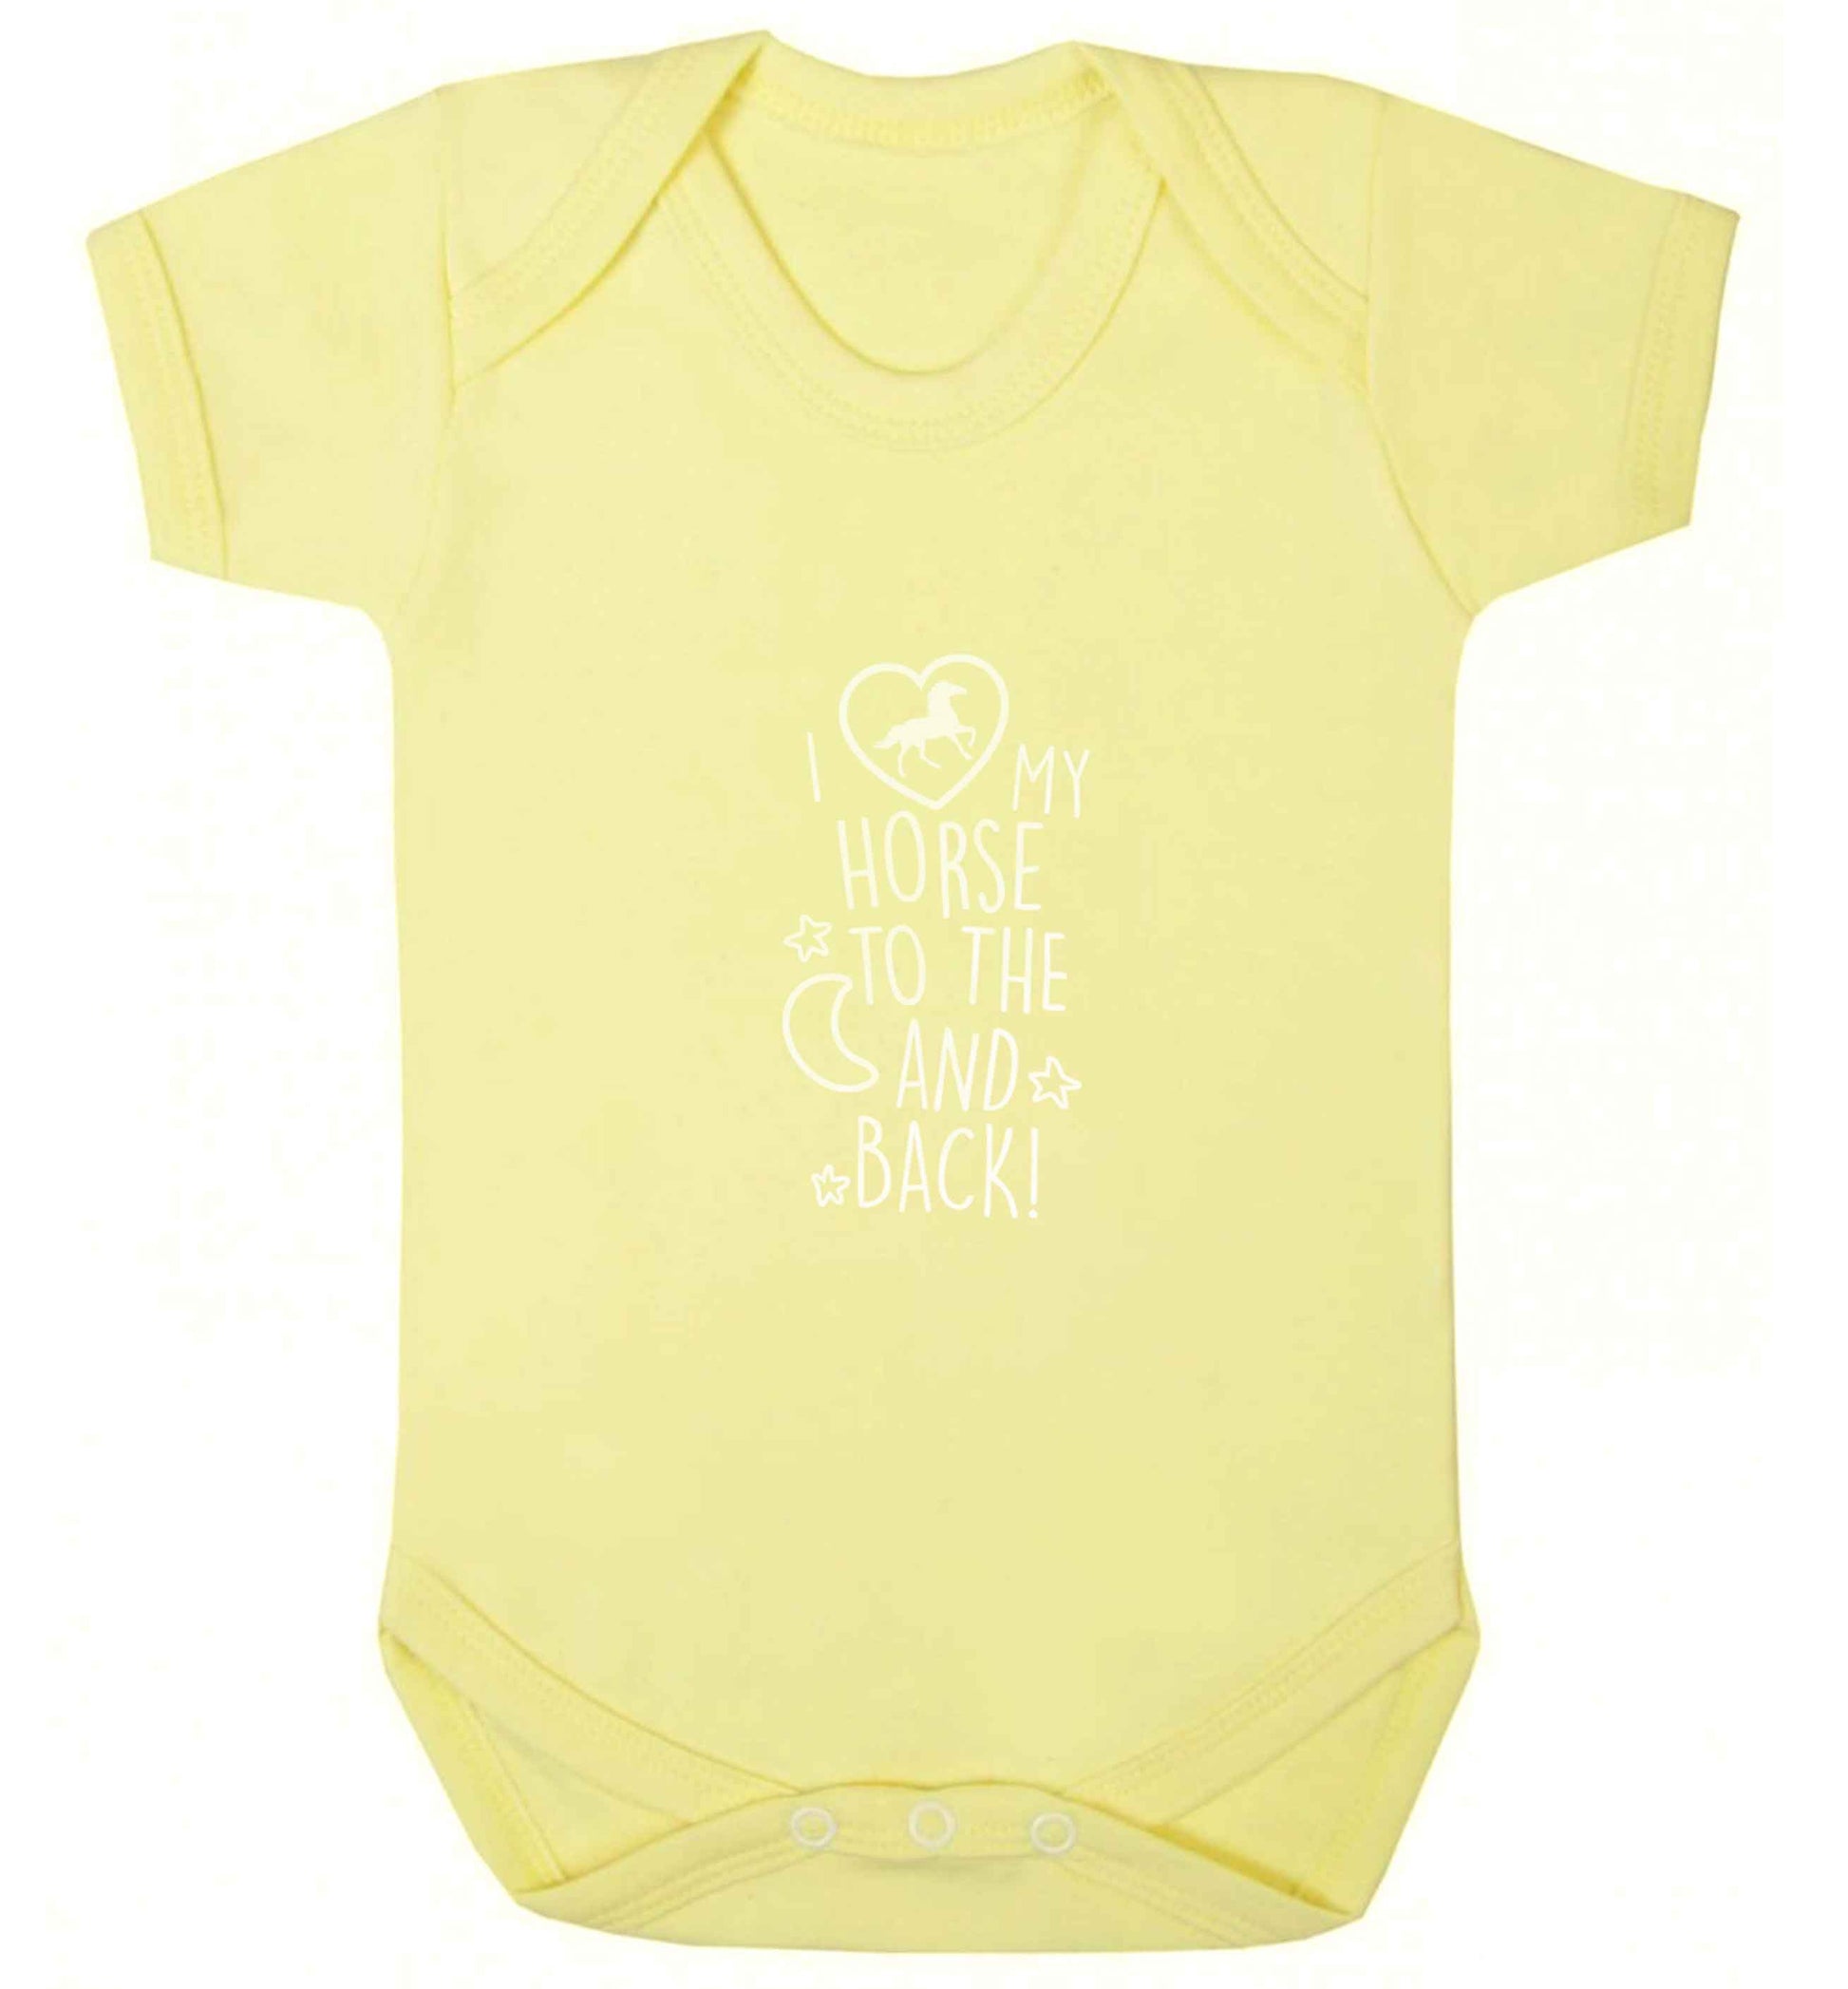 I love my horse to the moon and back baby vest pale yellow 18-24 months